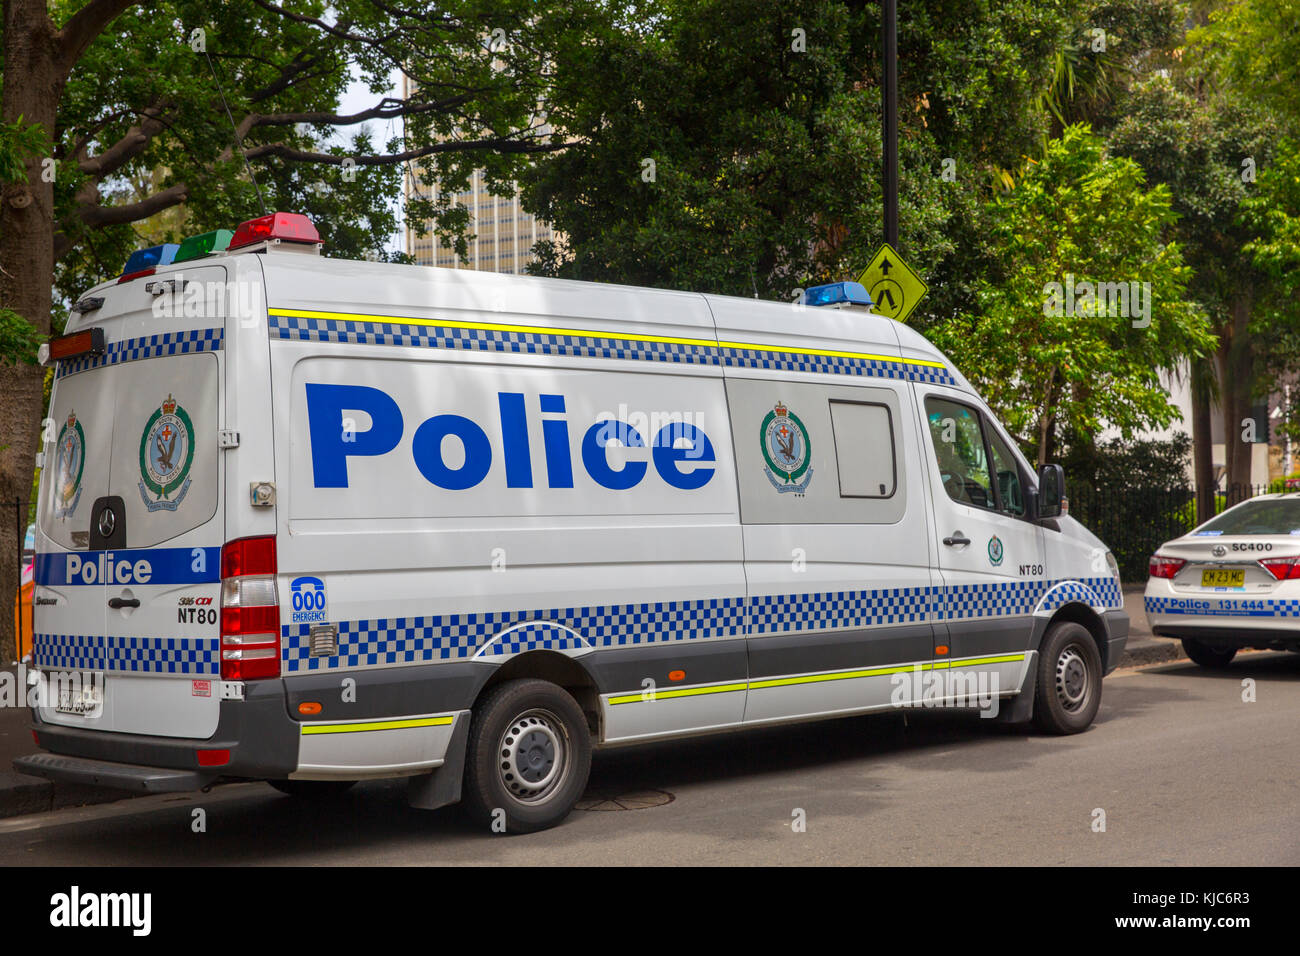 New South Wales police vehicle van in The Rocks area of Sydney,Australia Stock Photo